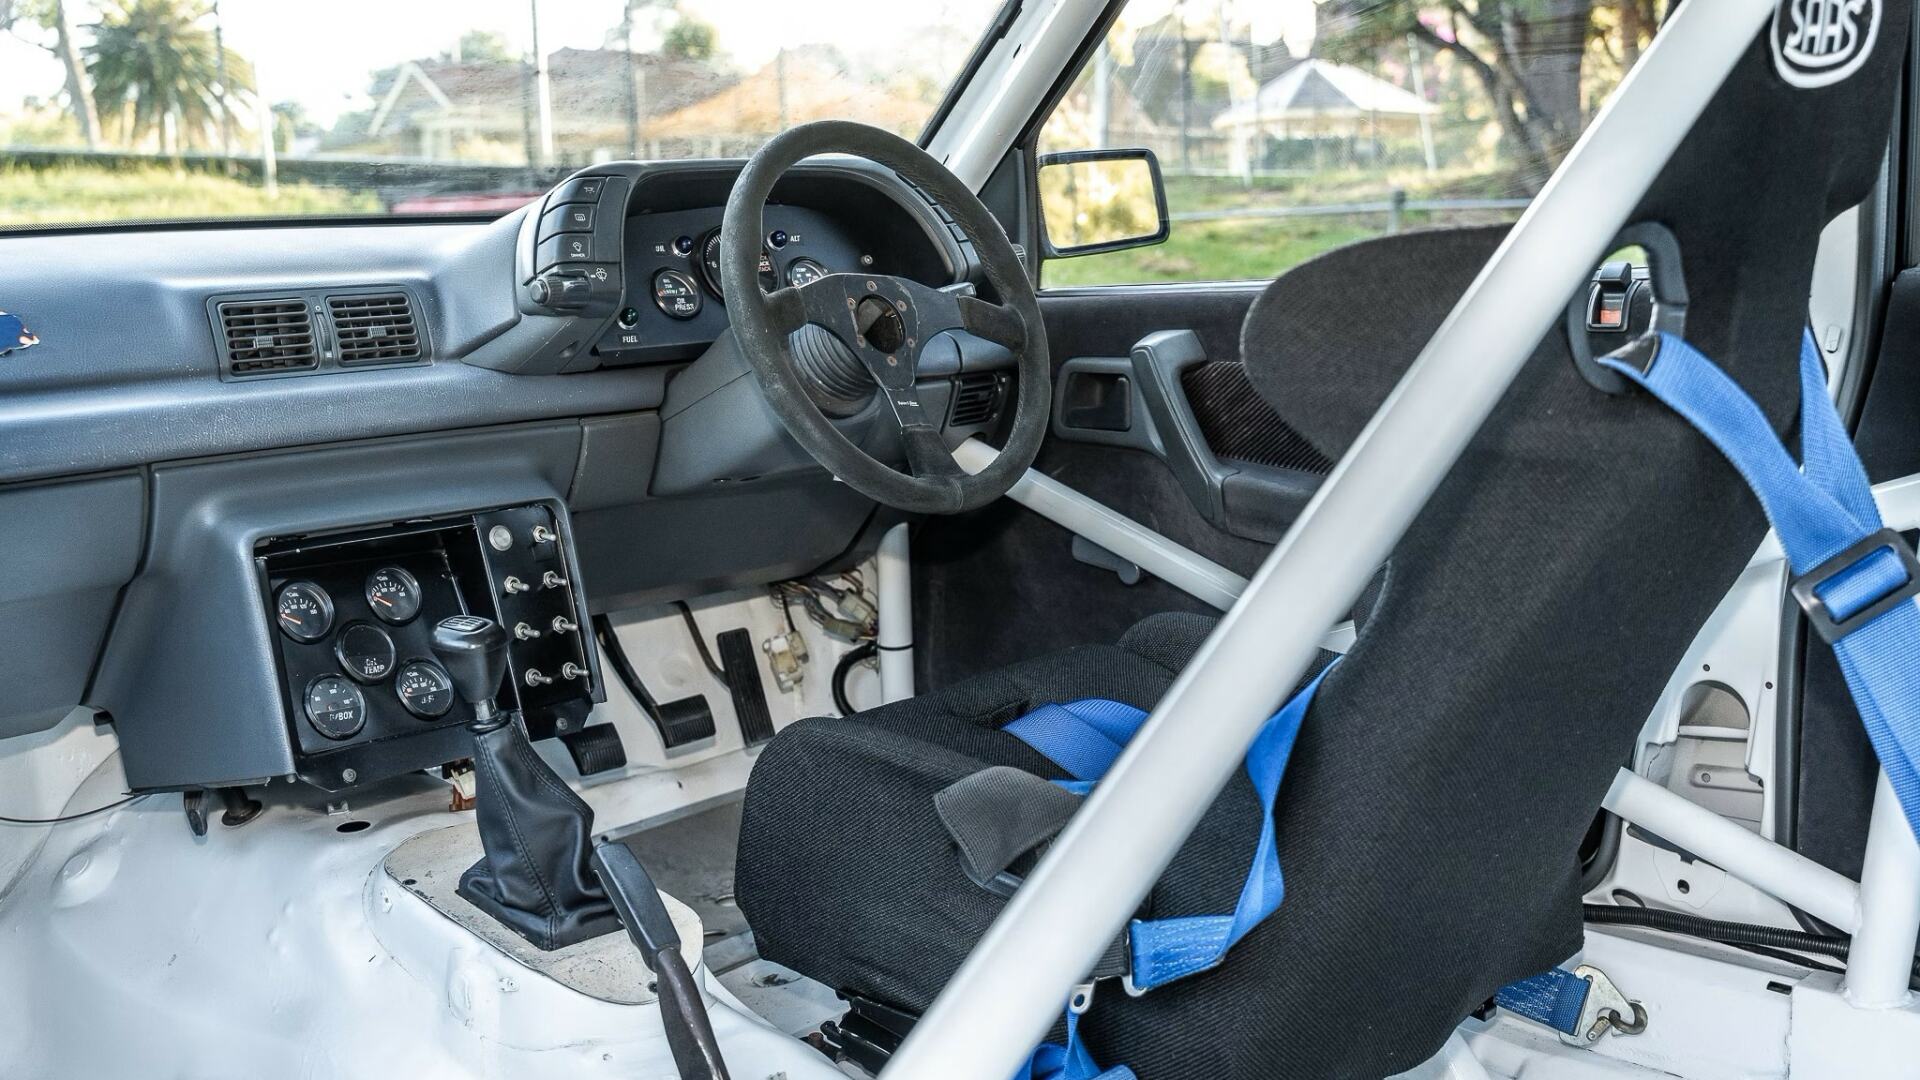 The Interior, Steering, Dashboard, And Central Console Of The 1990 Holden VN Commodore